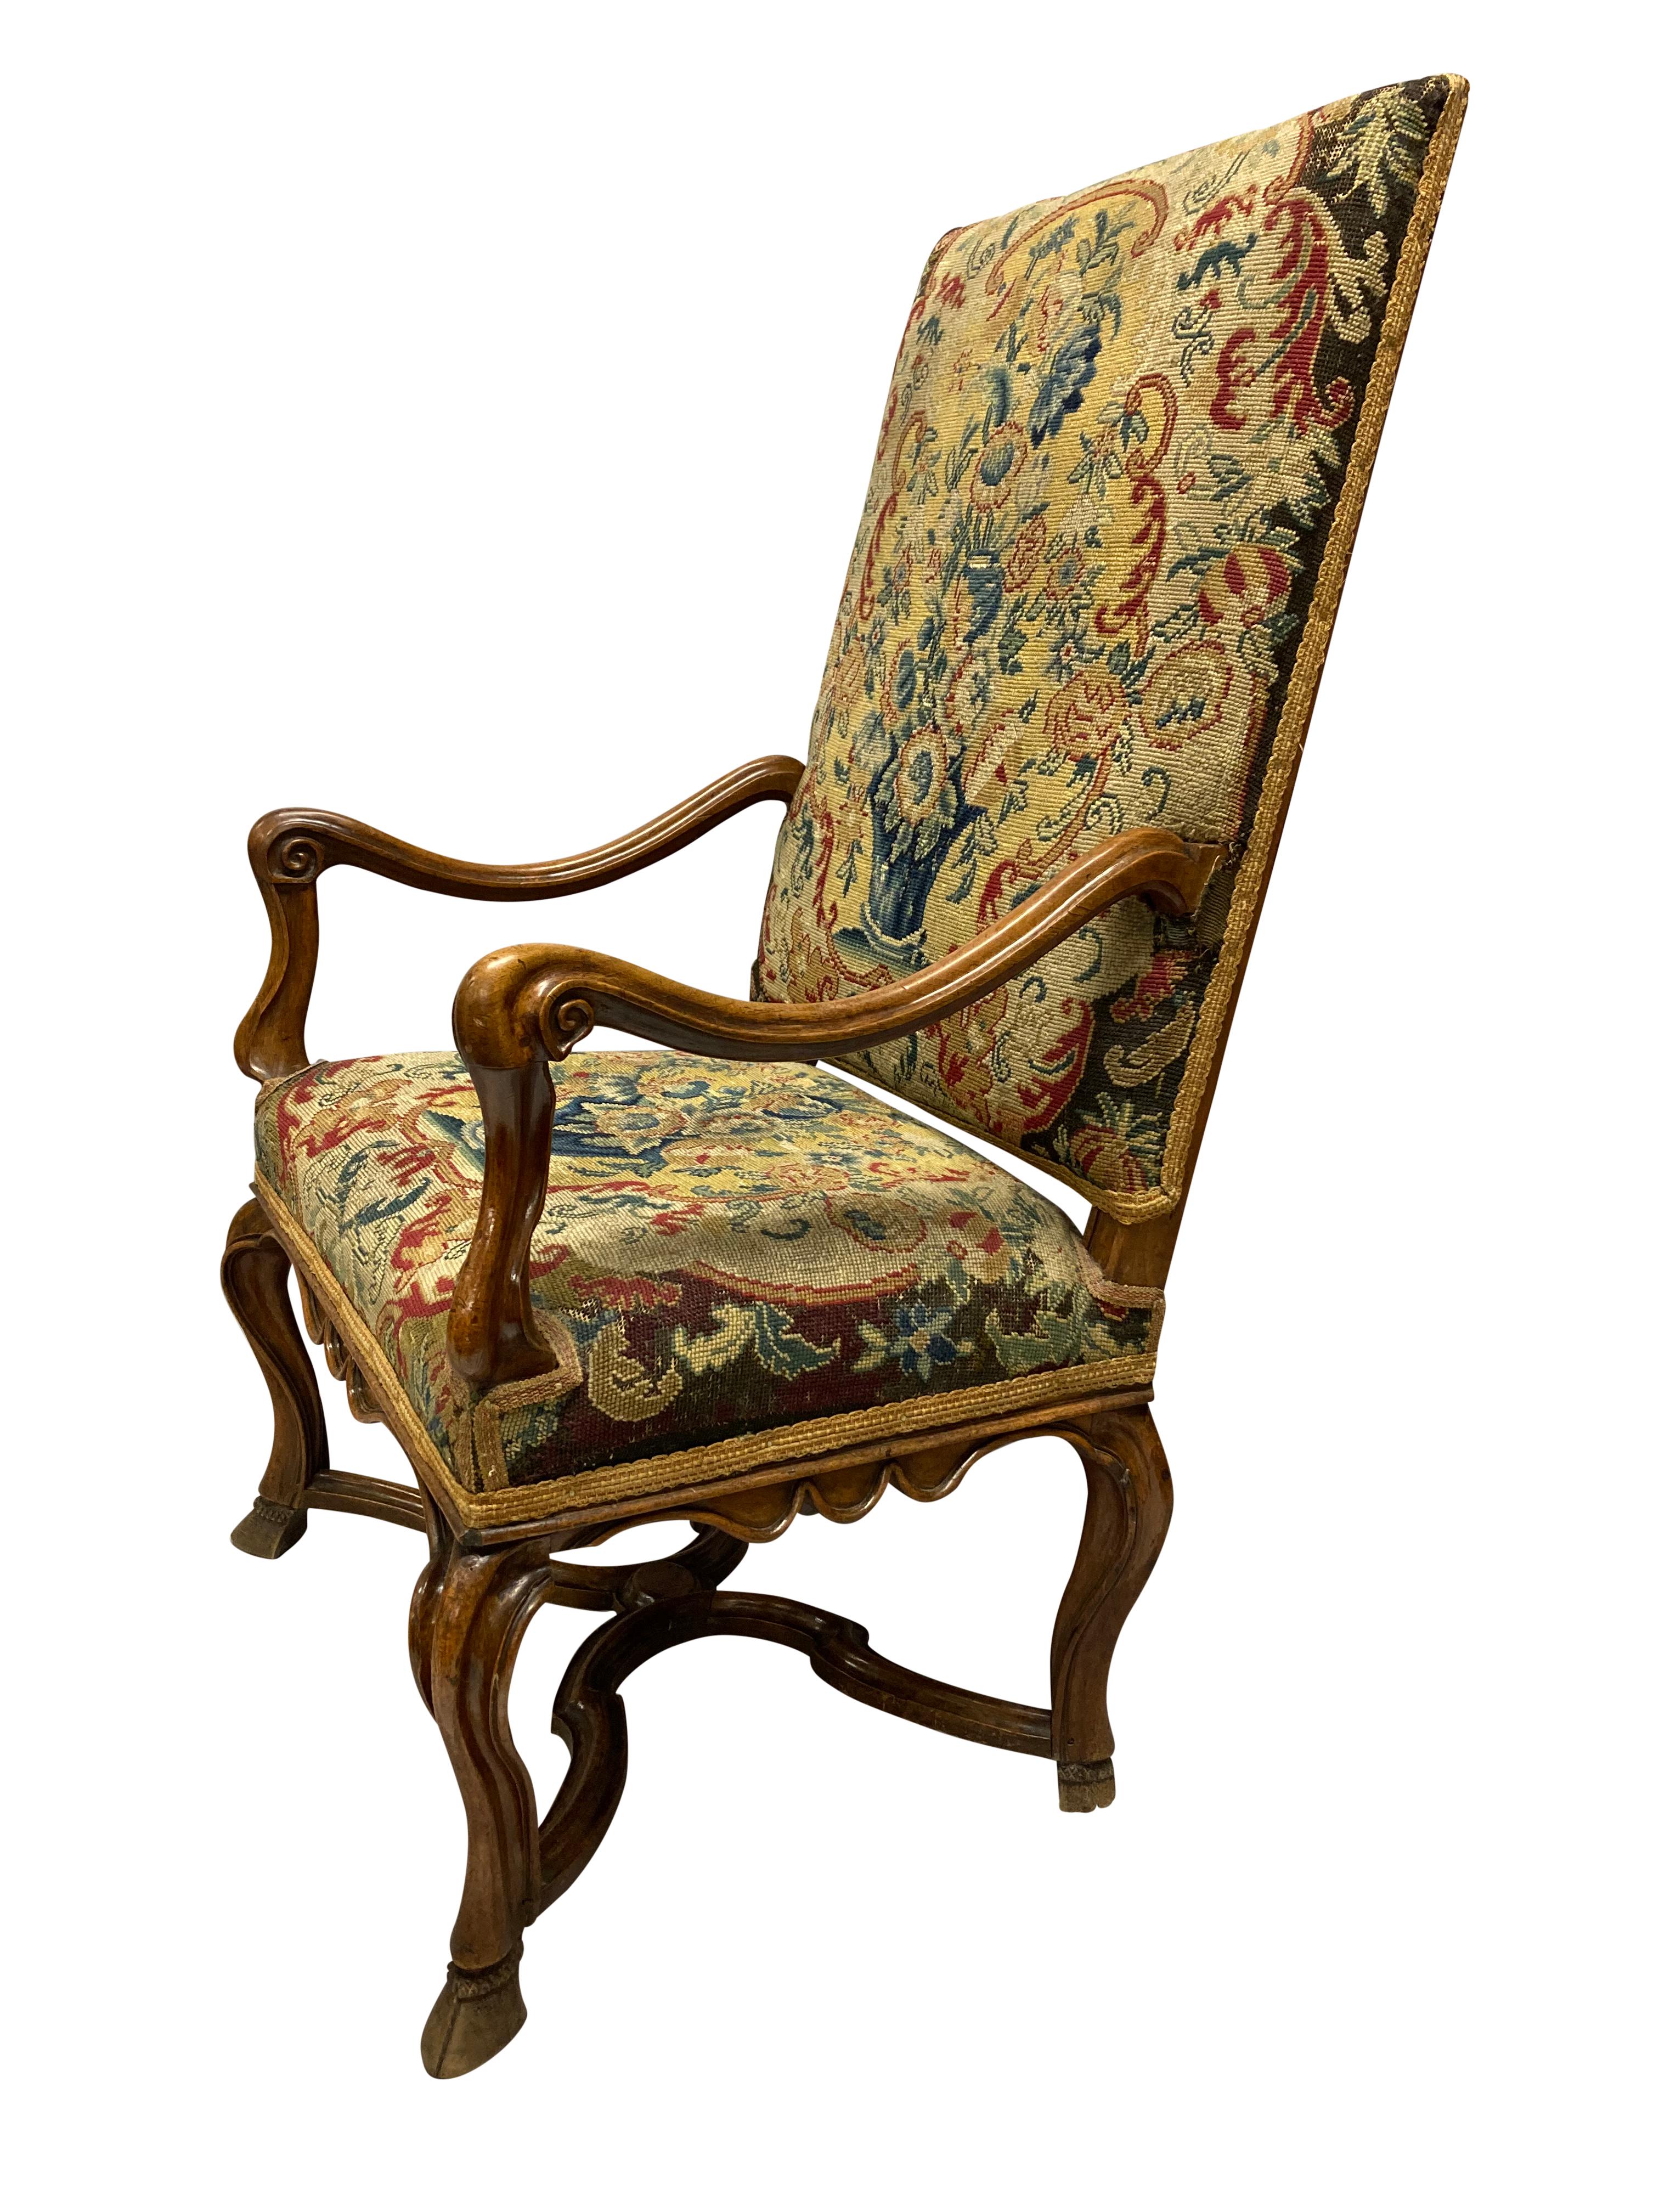 English William & Mary Armchair Covered in a Fine Needlepoint Tapestry